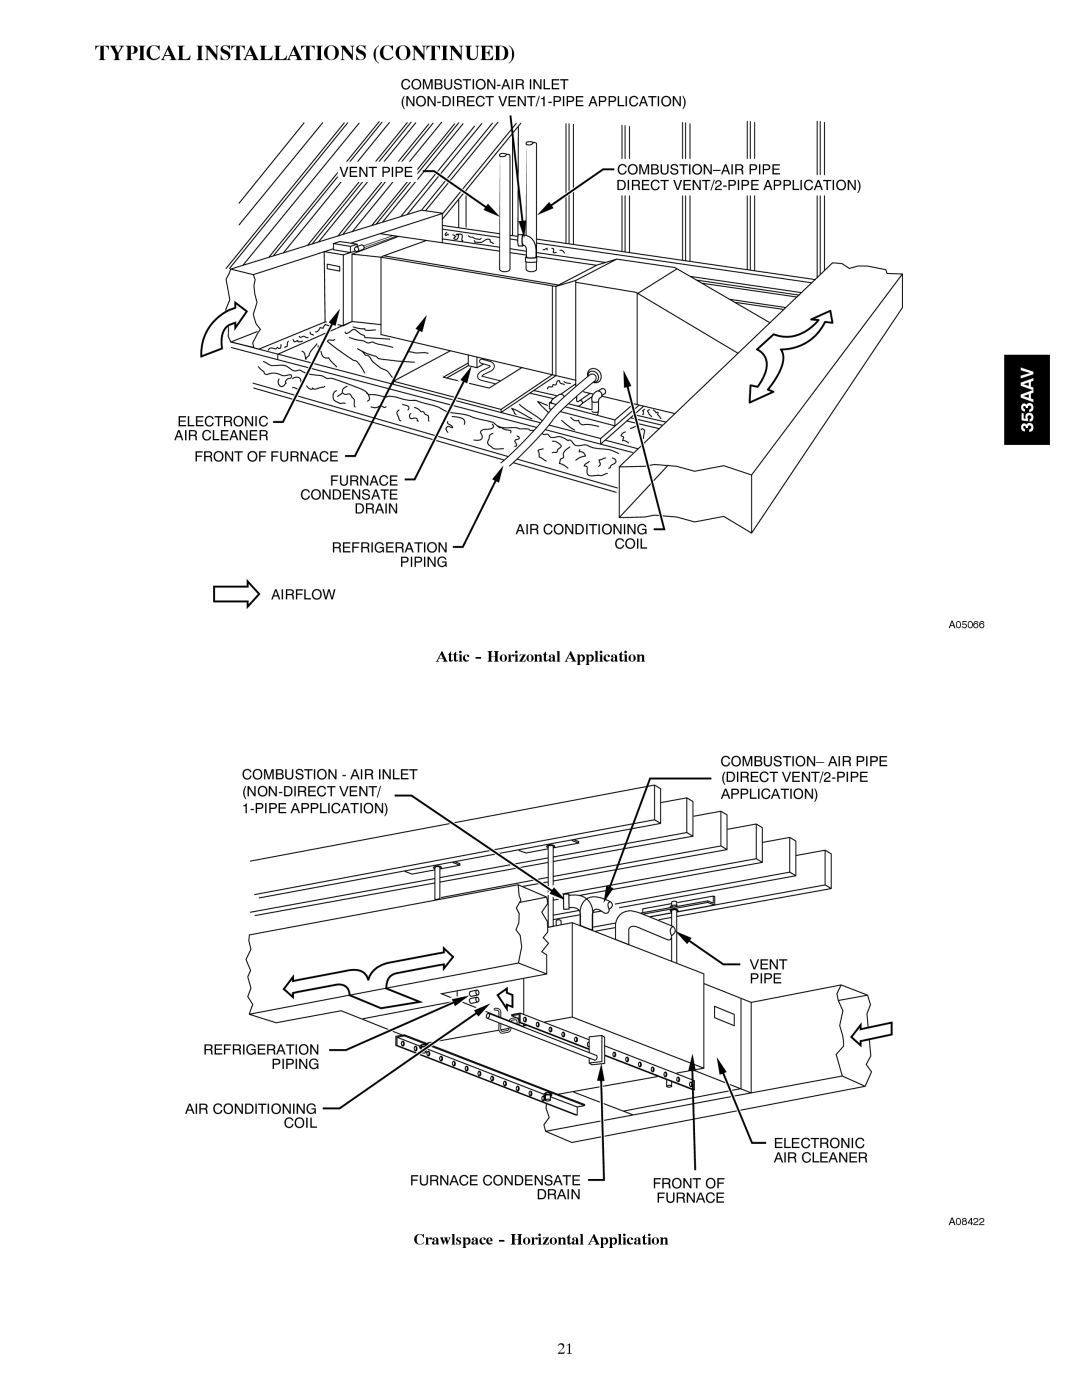 Bryant 353AAV manual Typical Installations Continued, Attic --Horizontal Application, Crawlspace --Horizontal Application 